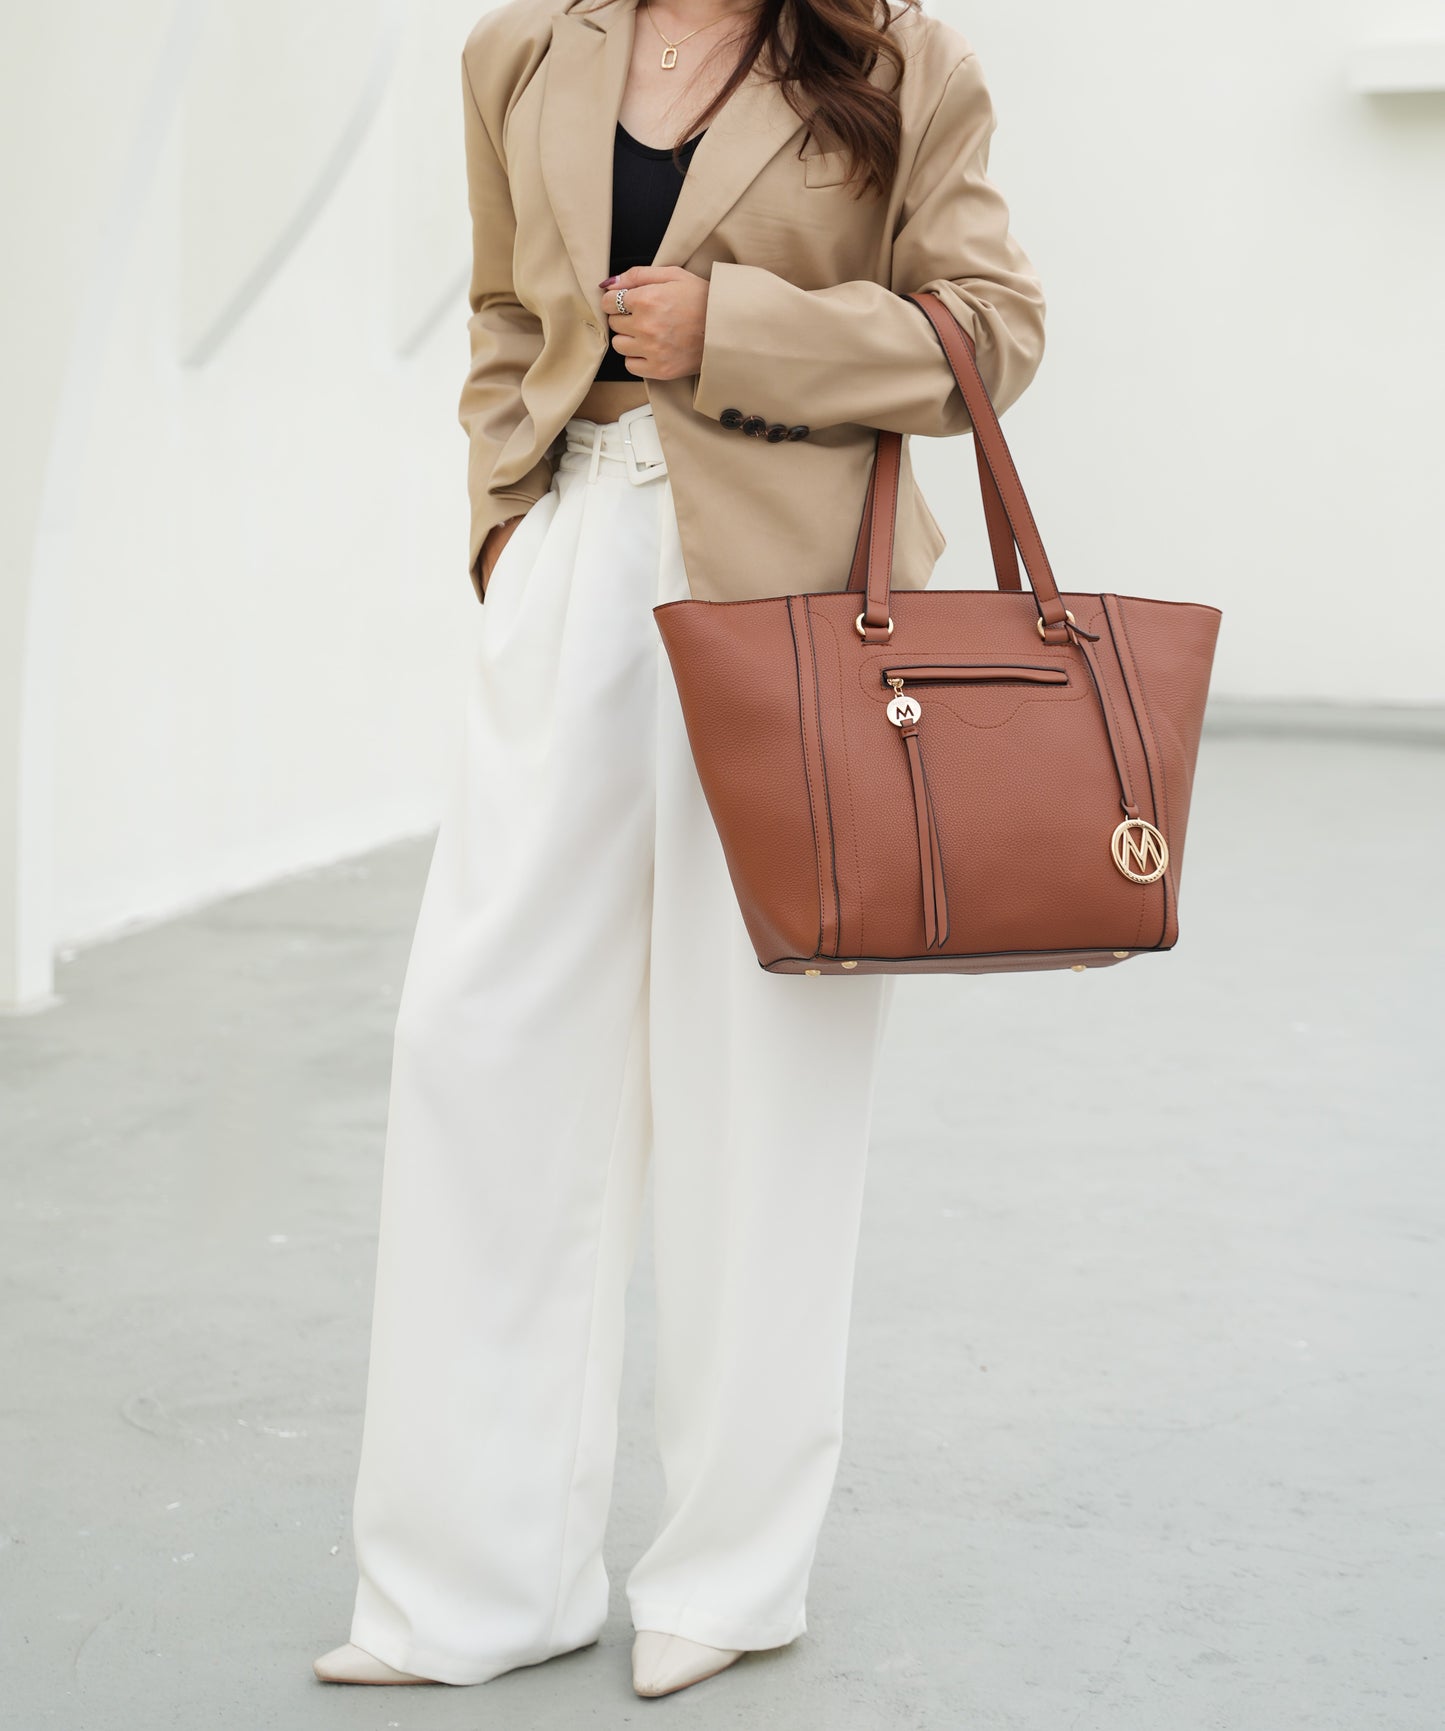 A woman wearing a tan blazer and white wide leg pants carrying a Pink Orpheus Alexandra Vegan Leather Women Tote Handbag with Wallet.